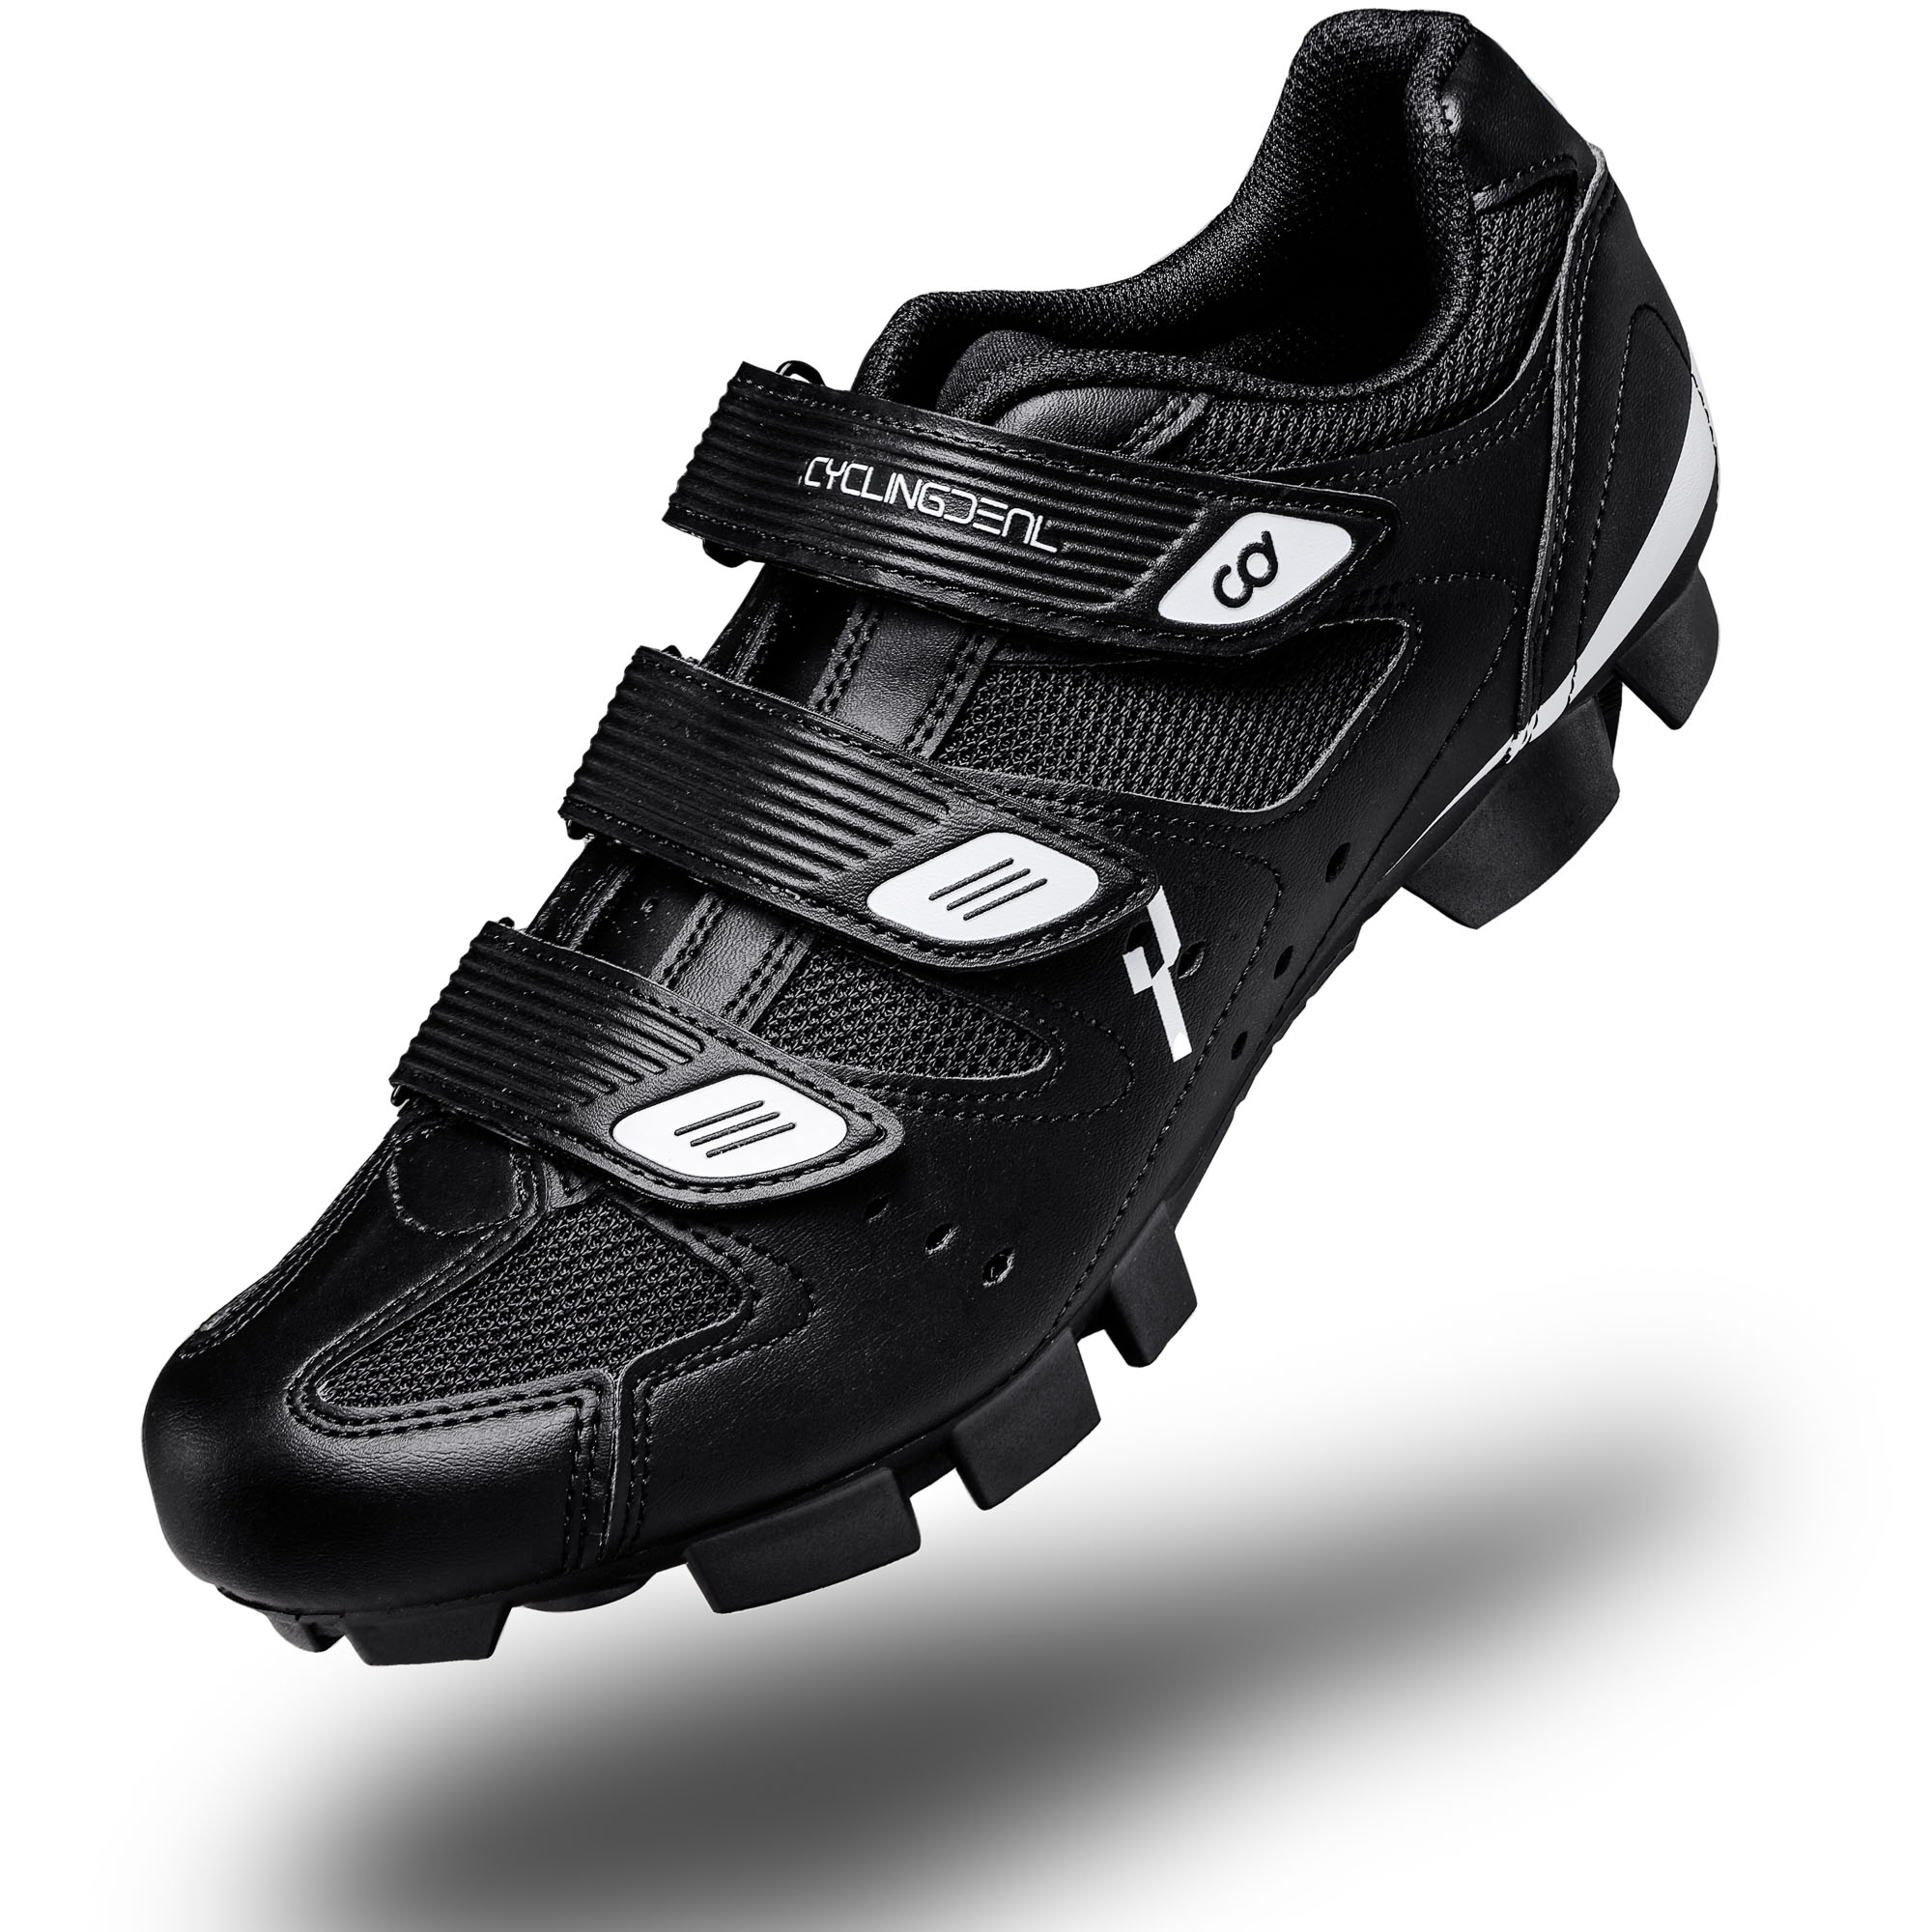 CyclingDeal Mountain Bicycle Bike Men's MTB Cycling Shoes Black Compatible with SHIMANO SPD and CrankBrothers Cleats | Size 49